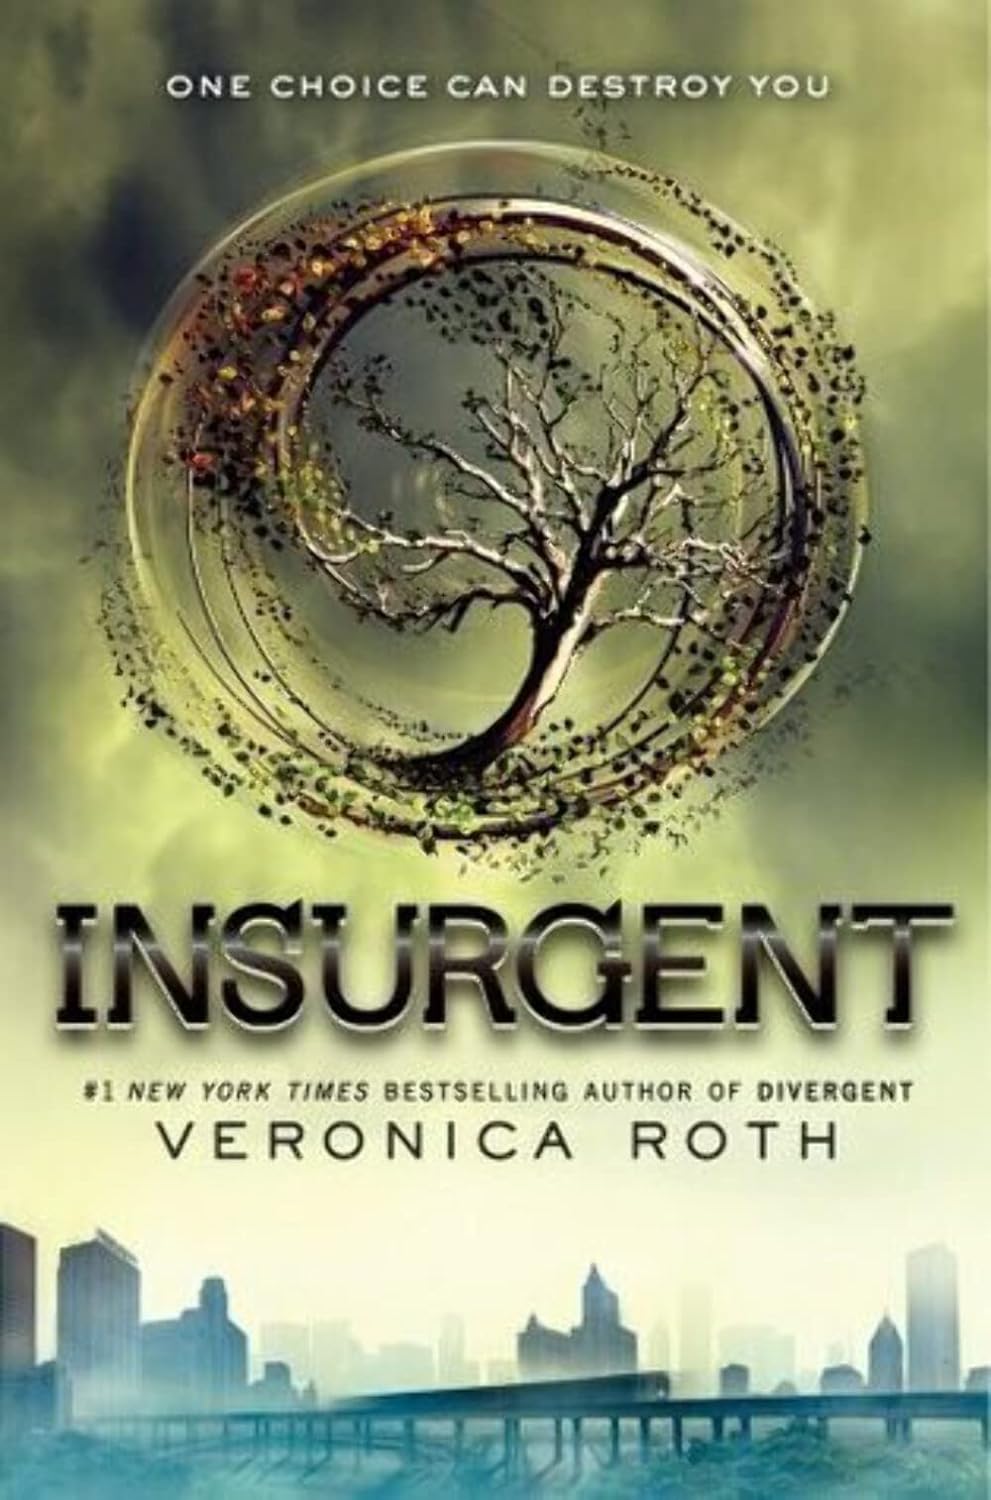 Insurgent (Book 2) by Veronica Roth